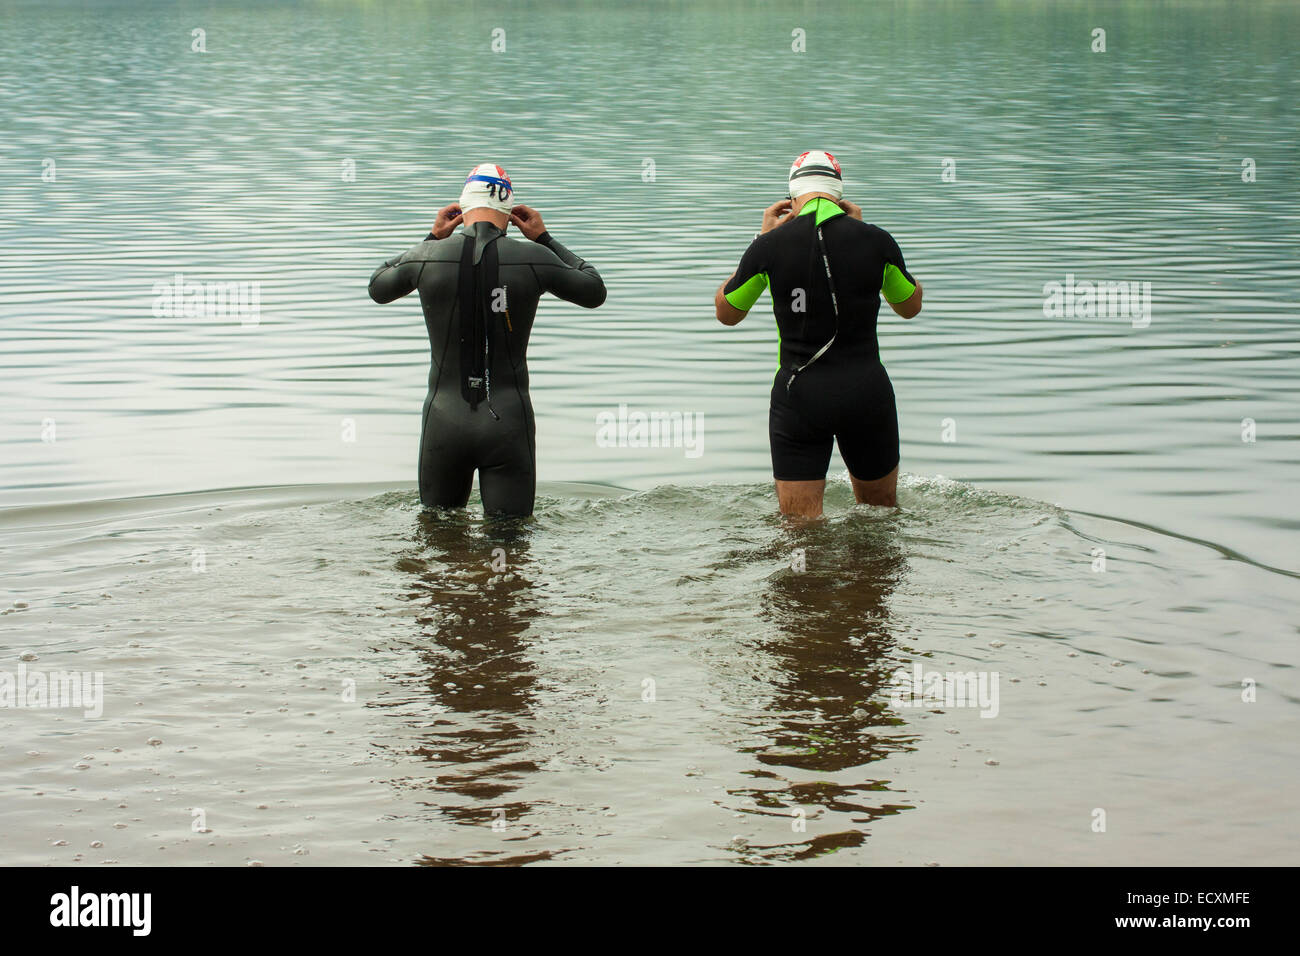 Athletes testing the waters before the start of a triathlon event at Ladon lake. Arcadia, Peloponnese, Greece Stock Photo